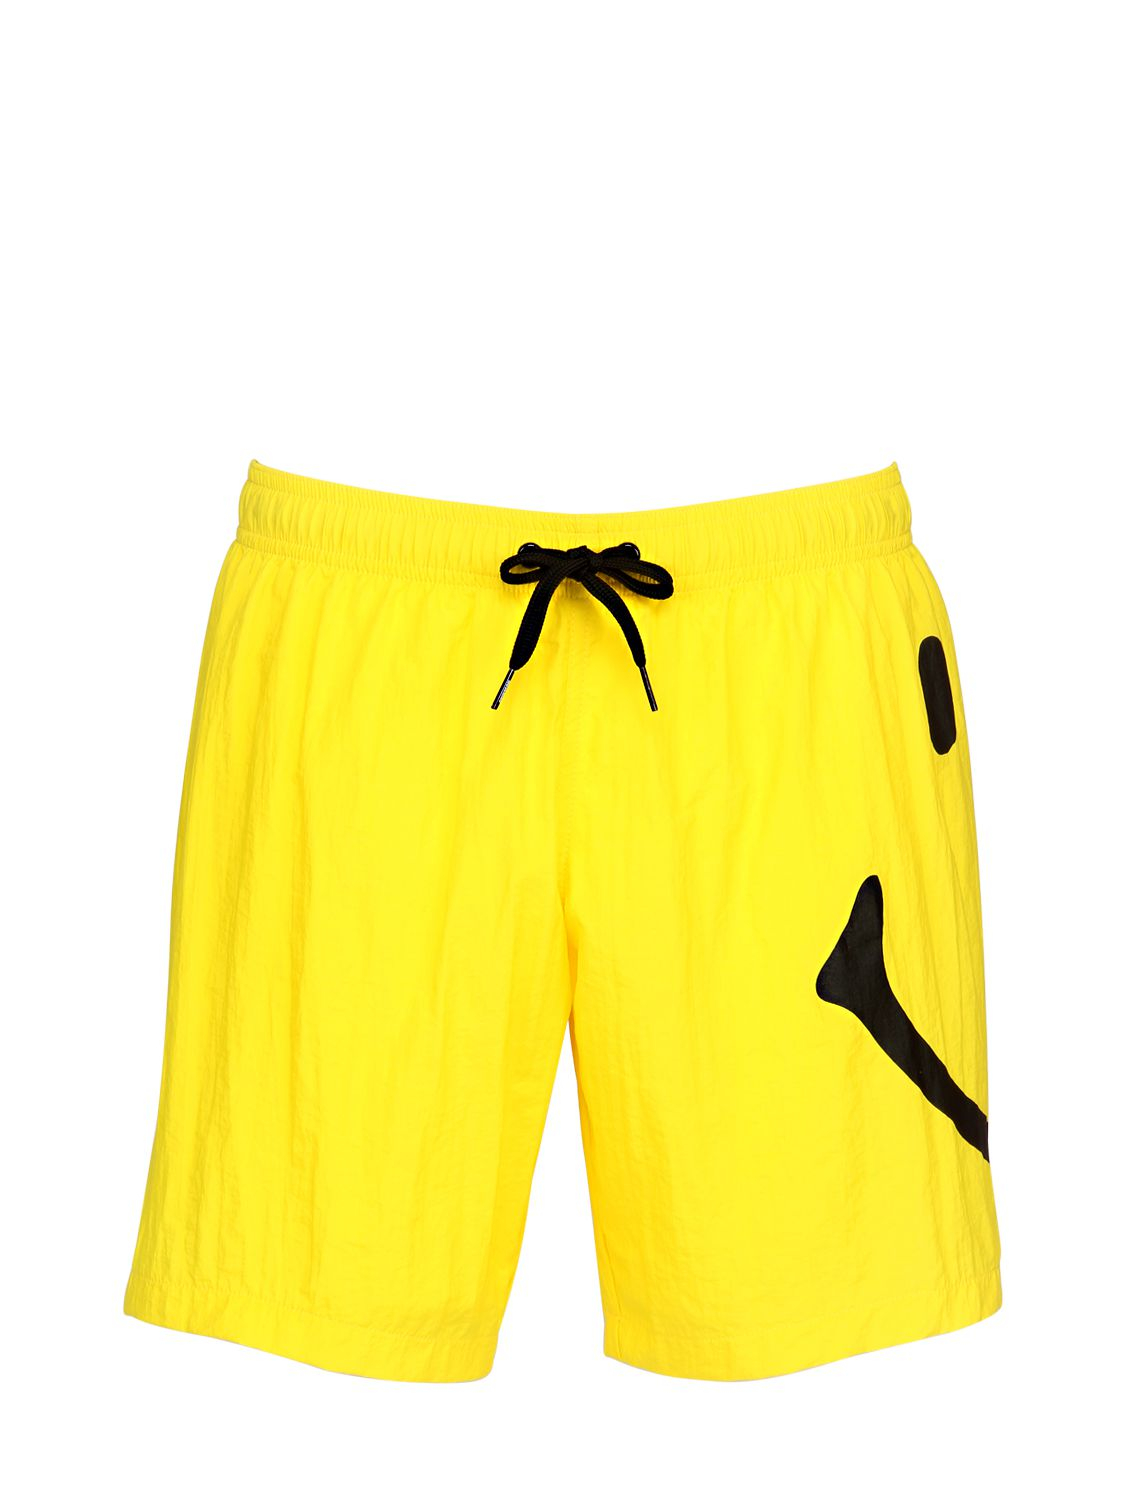 Moschino Smiley Printed Nylon Swimming Shorts in Yellow for Men - Lyst